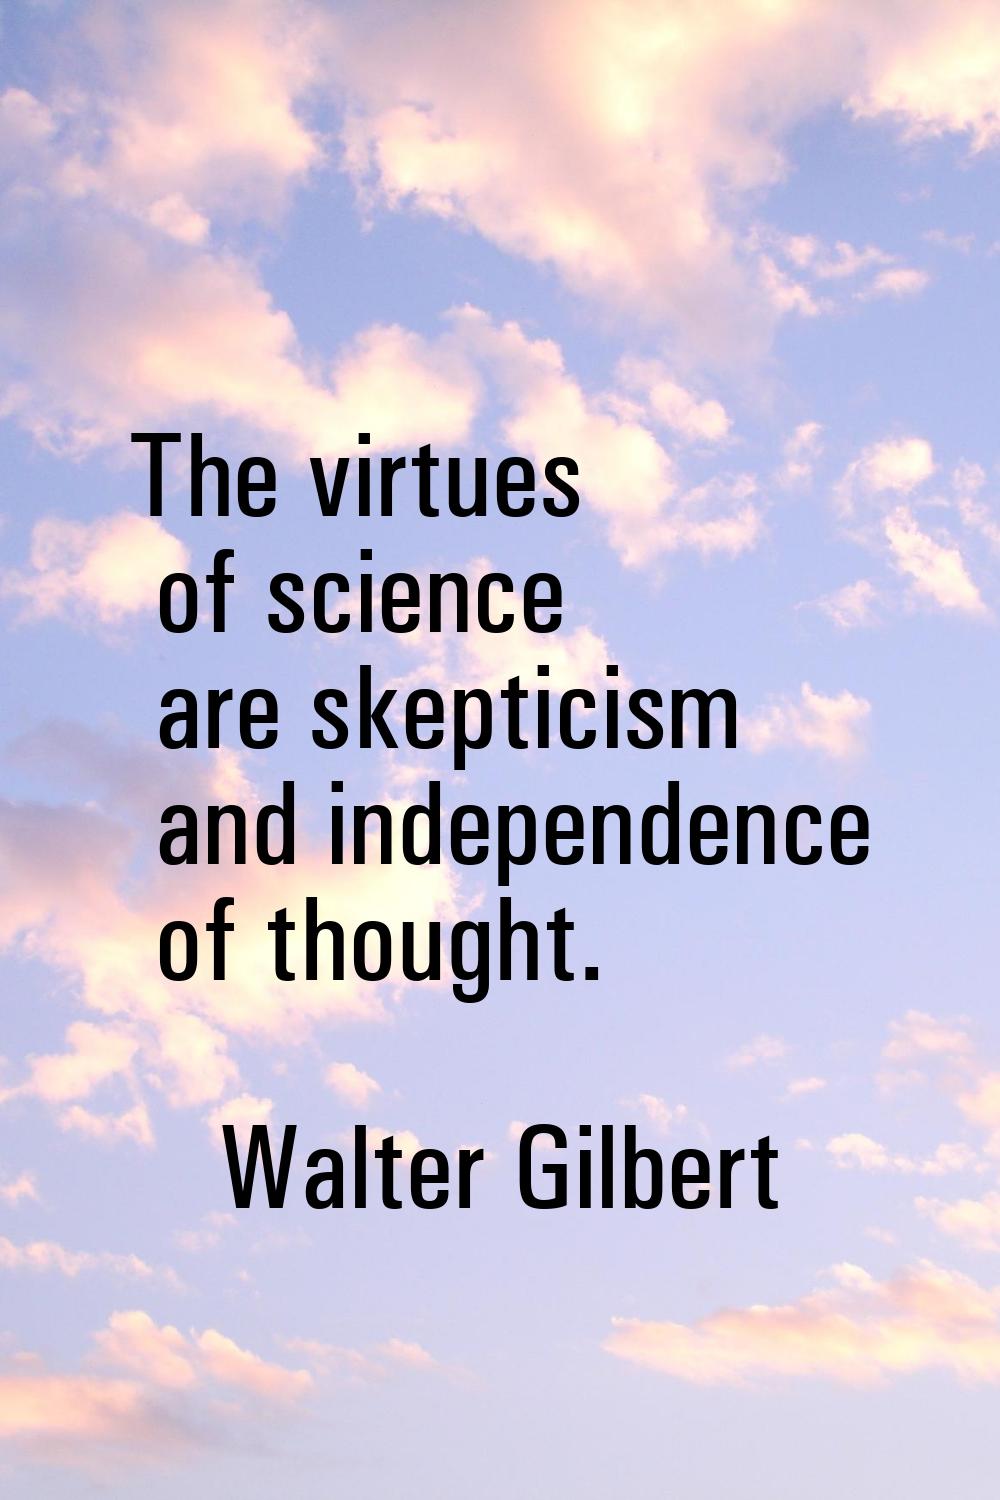 The virtues of science are skepticism and independence of thought.